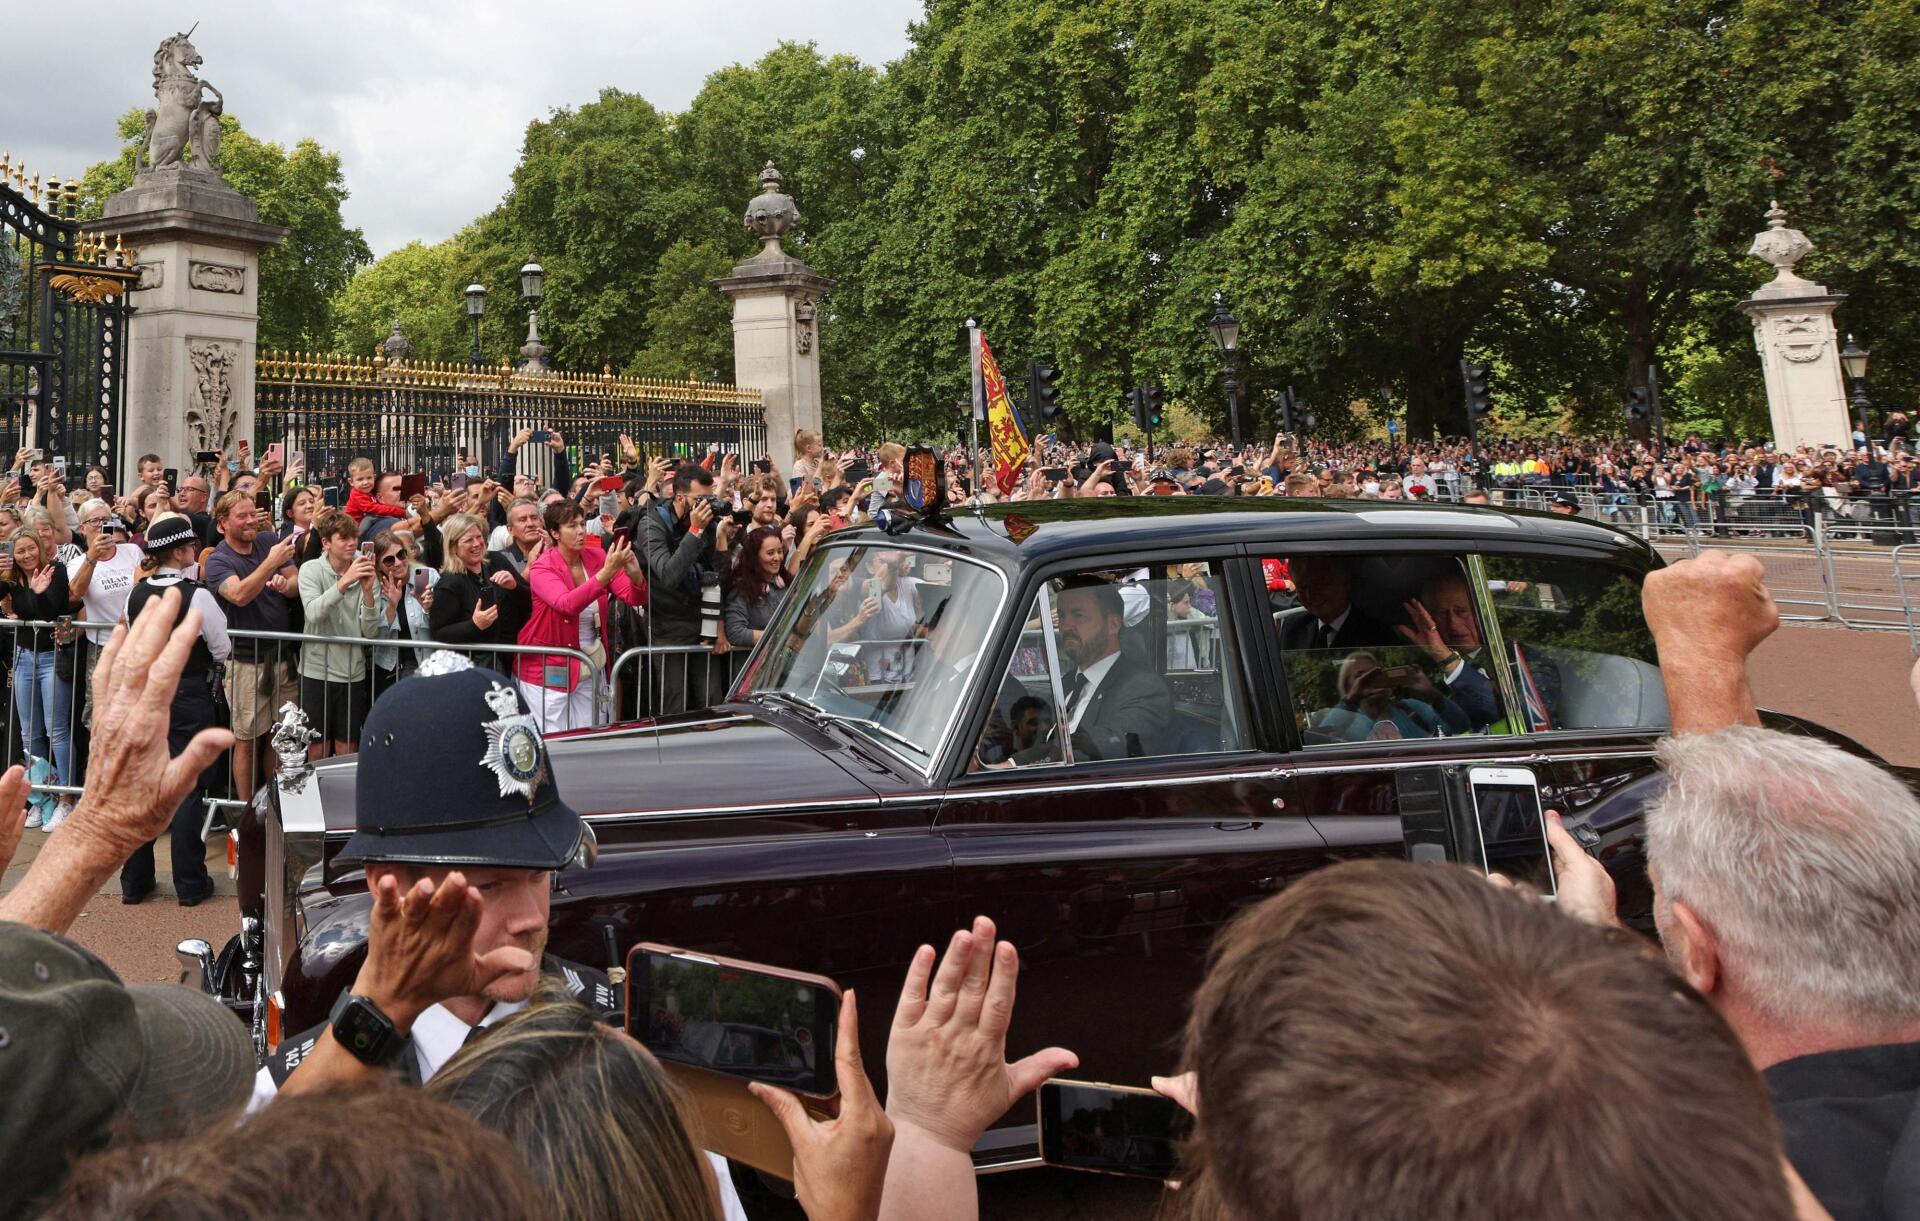  Charles III cheered by the crowd on his return to Buckingham Palace after the Council of Accession ceremony in London on September 10, 2022.